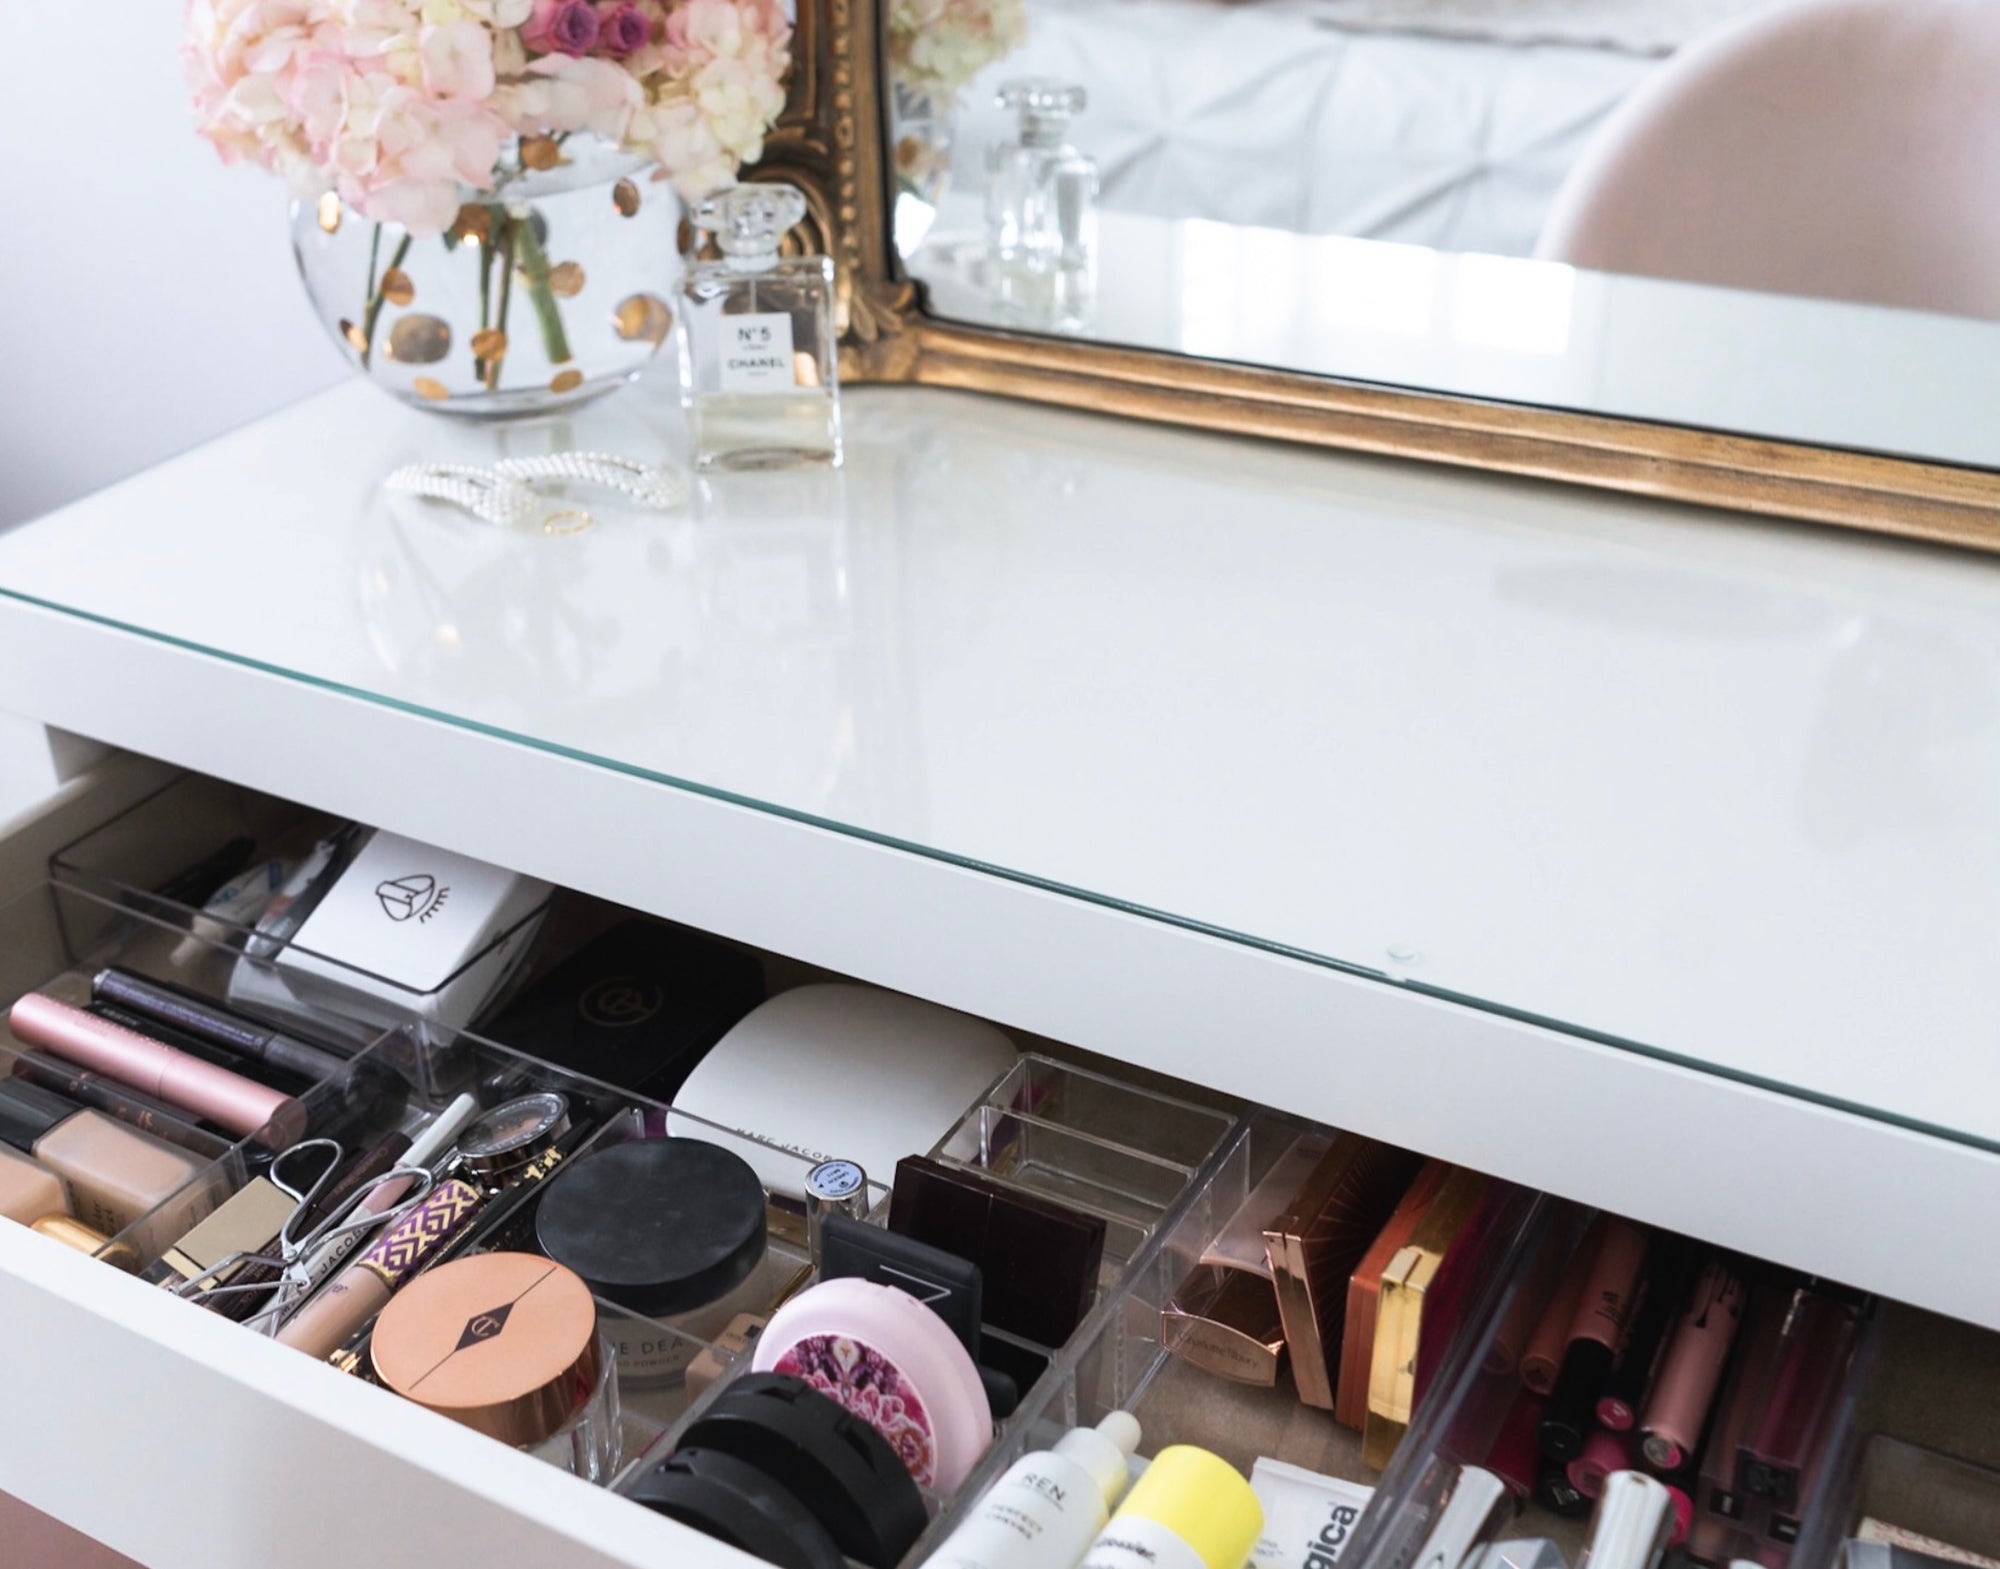 Tidying Up Your Beauty Collection, KonMari Style